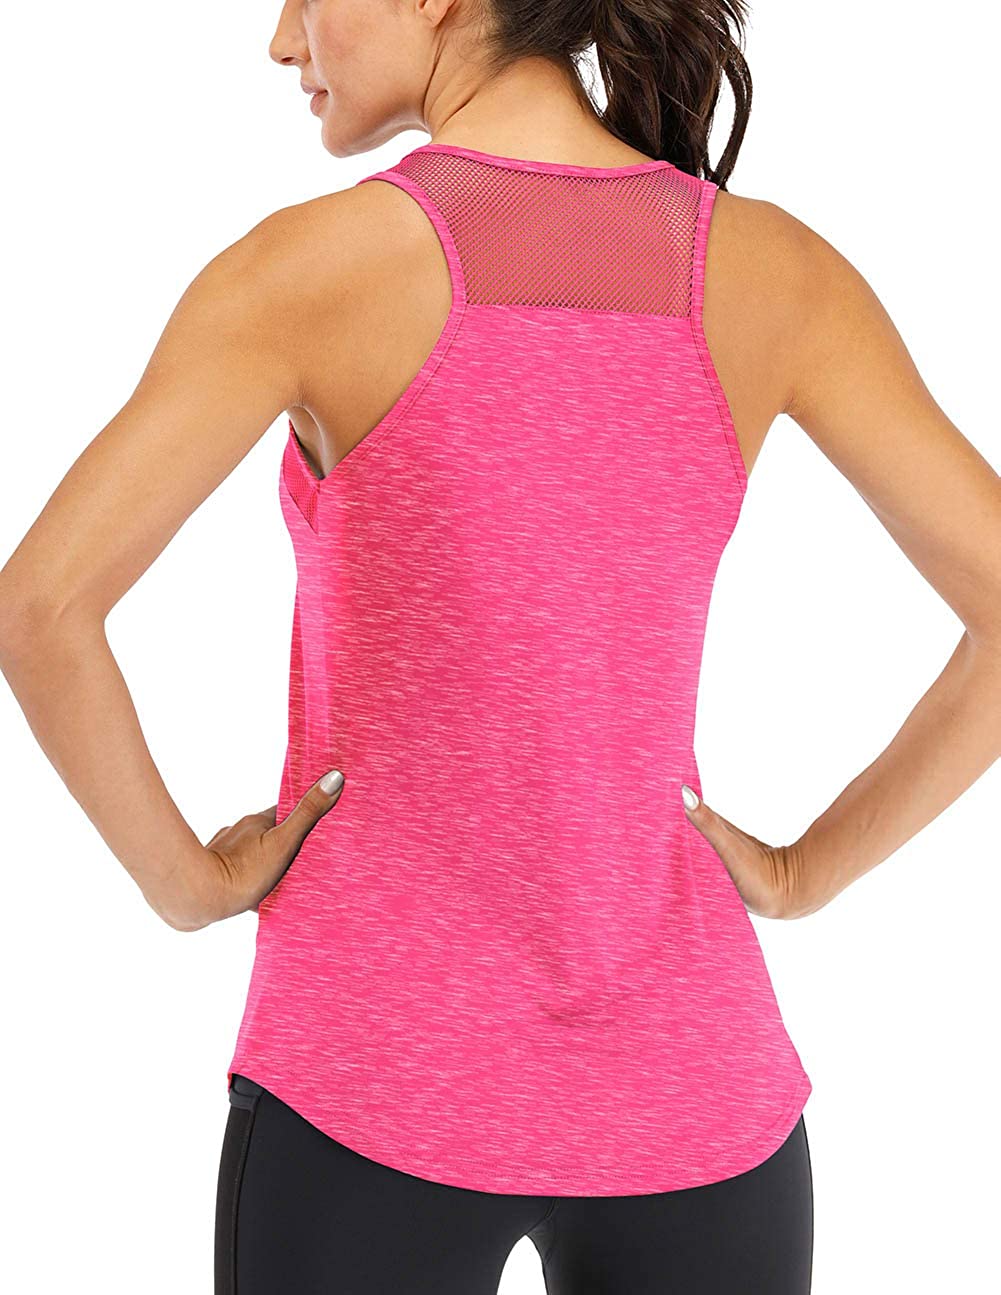 Womens Workout Tank Tops Gym Sleeveless Yoga Shirts Mesh Breathable Sport Tops